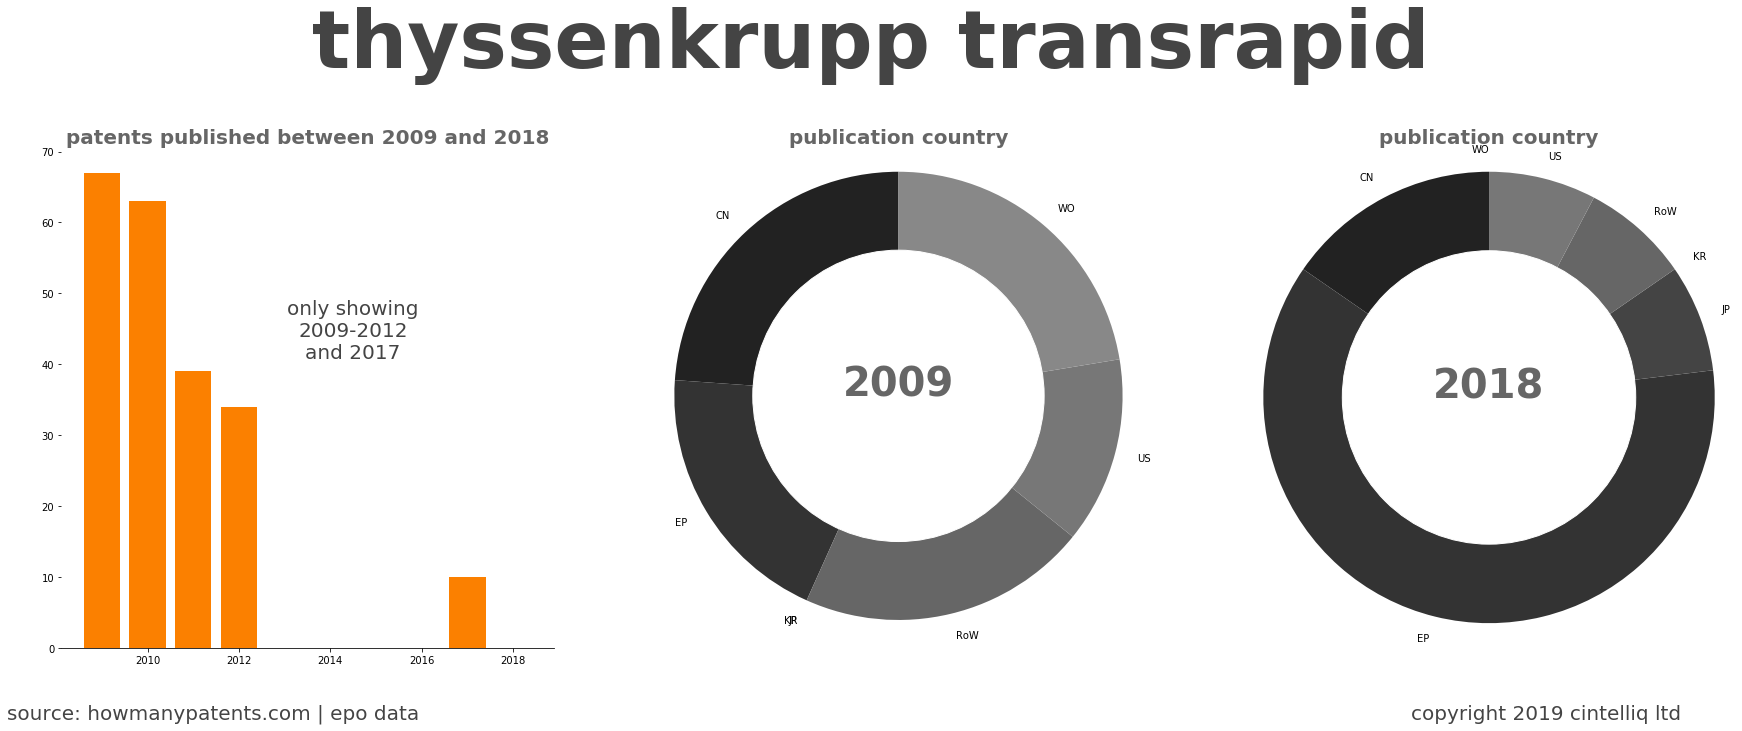 summary of patents for Thyssenkrupp Transrapid